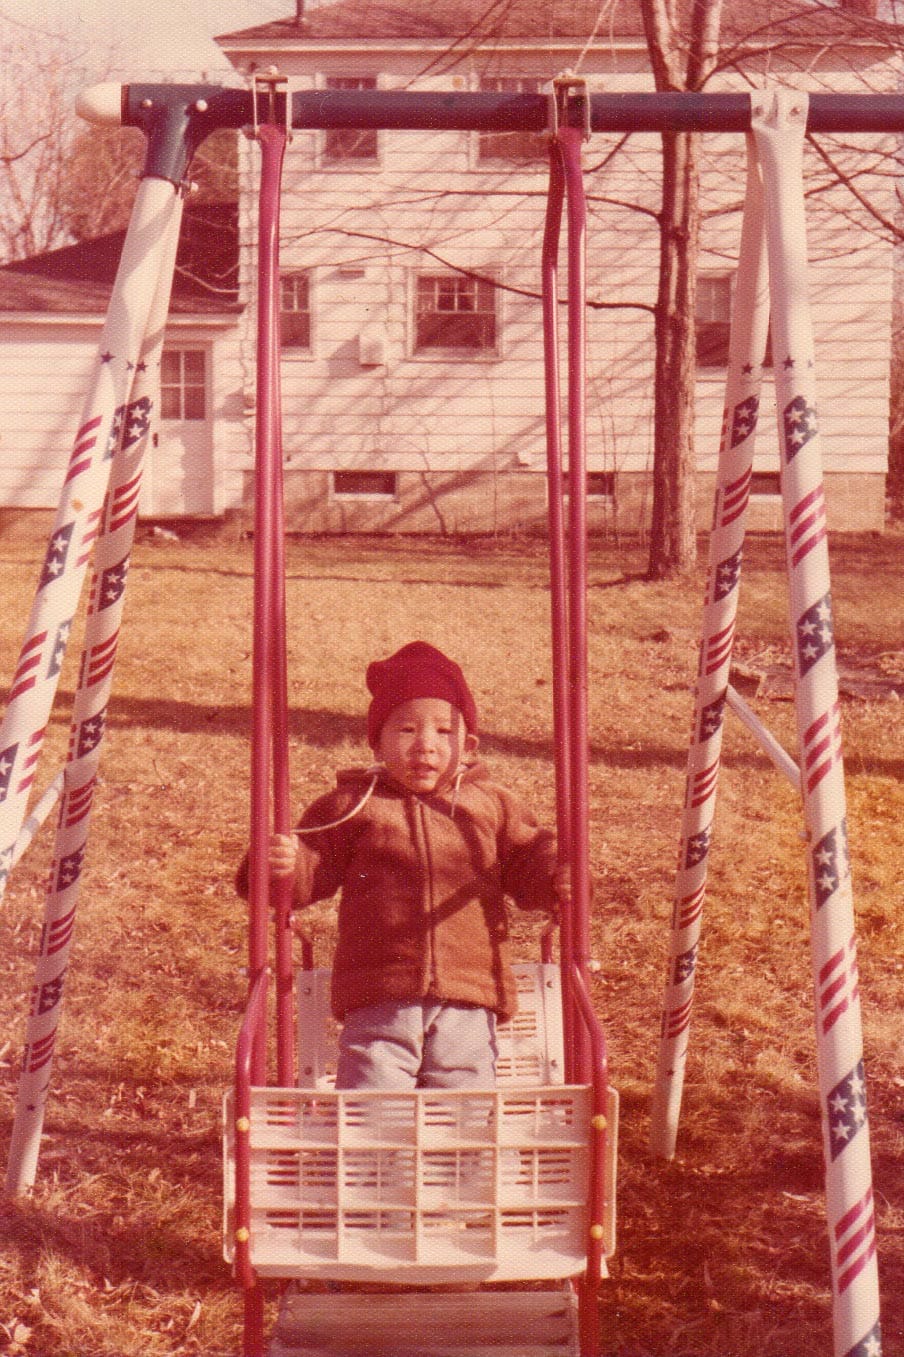 Andrew Yang, at age 2, sitting on a swing set in his home of upstate New York.